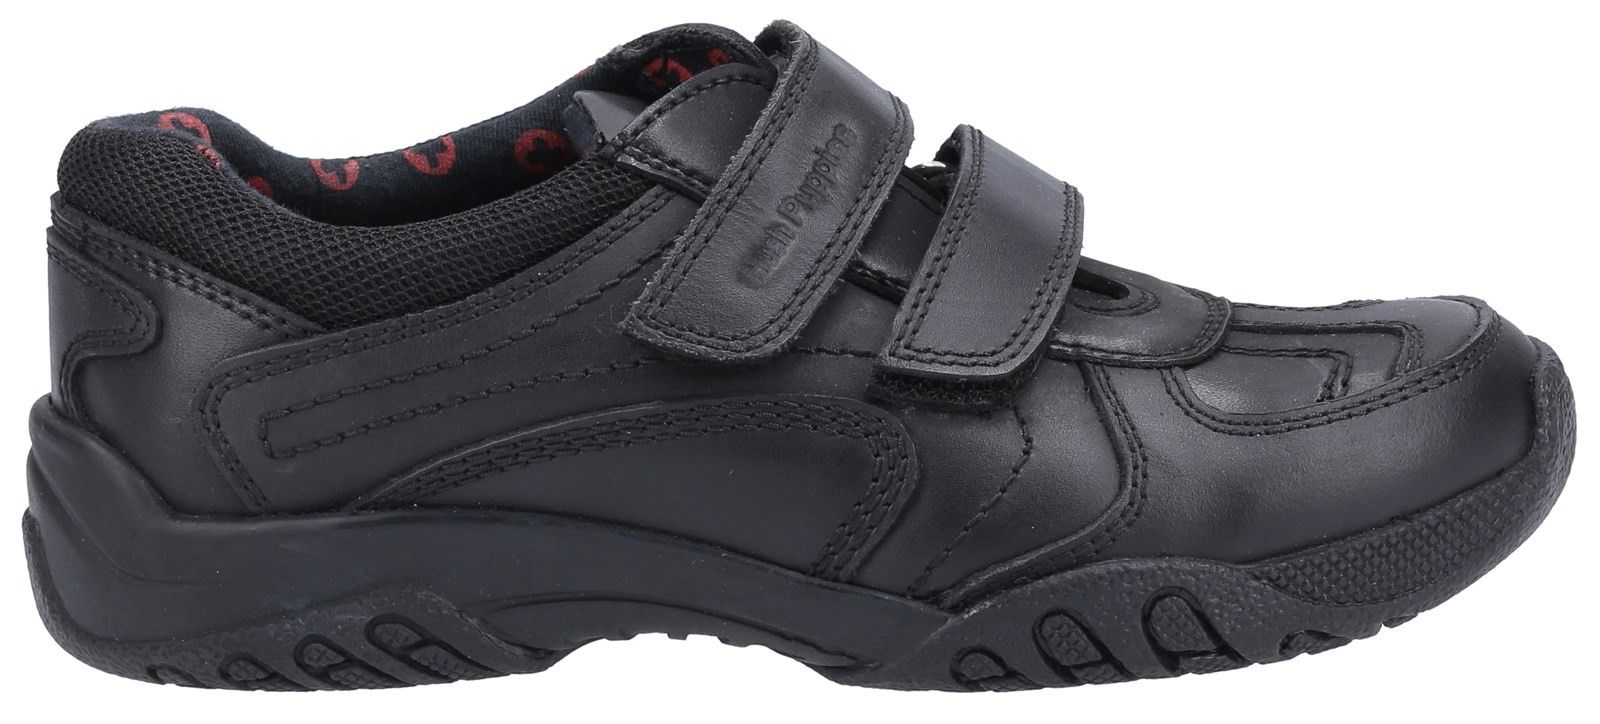 This smart black single fit leather boy's shoe is complete with a padded ankle collar for extra comfort. The toe is strengthened to ensure the shoe is hard wearing and robust.Full leather upper.